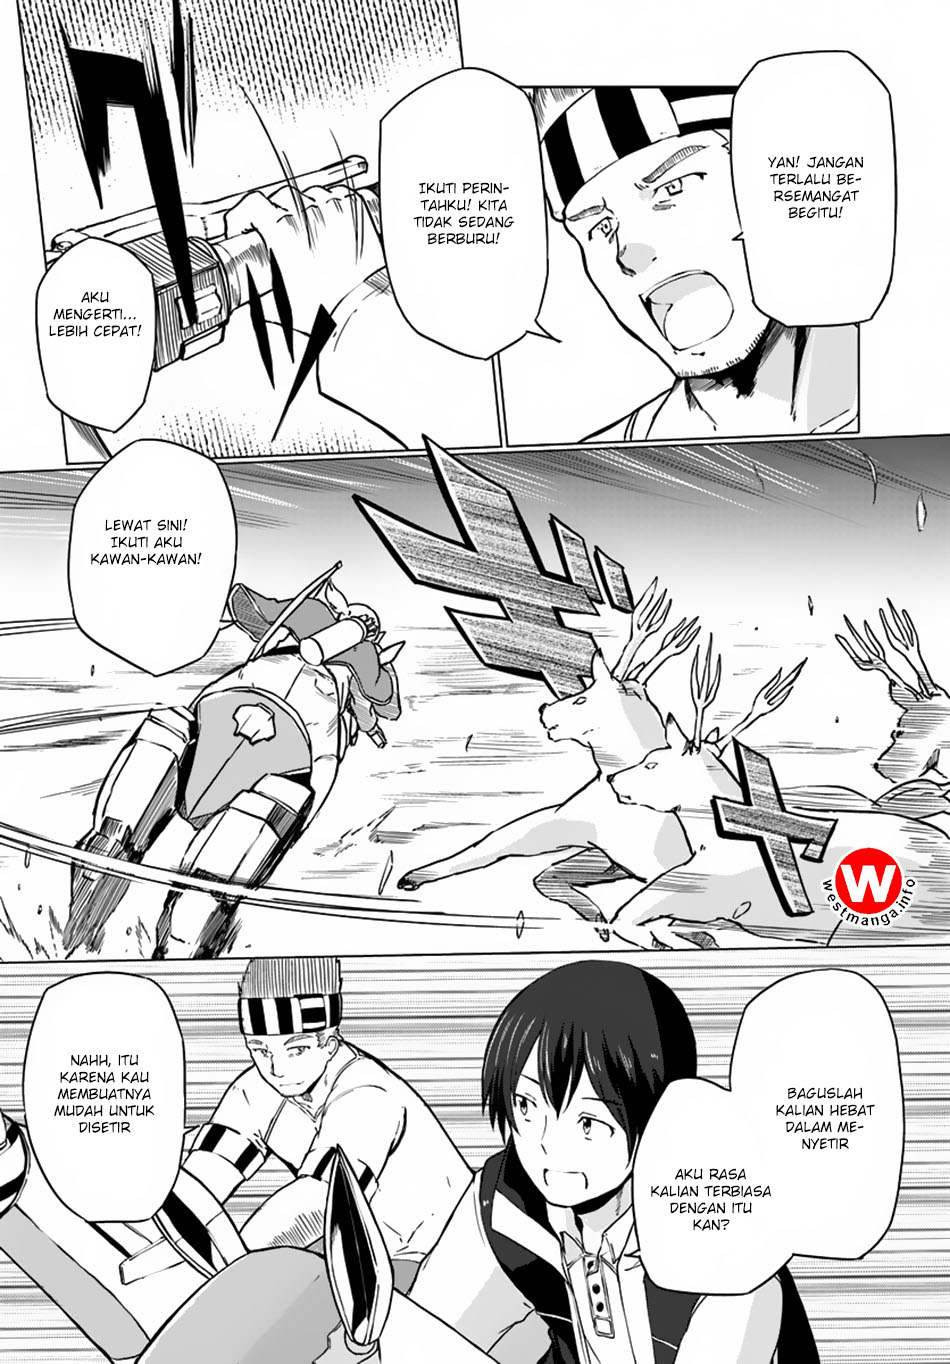 Magi Craft Meister Chapter 08